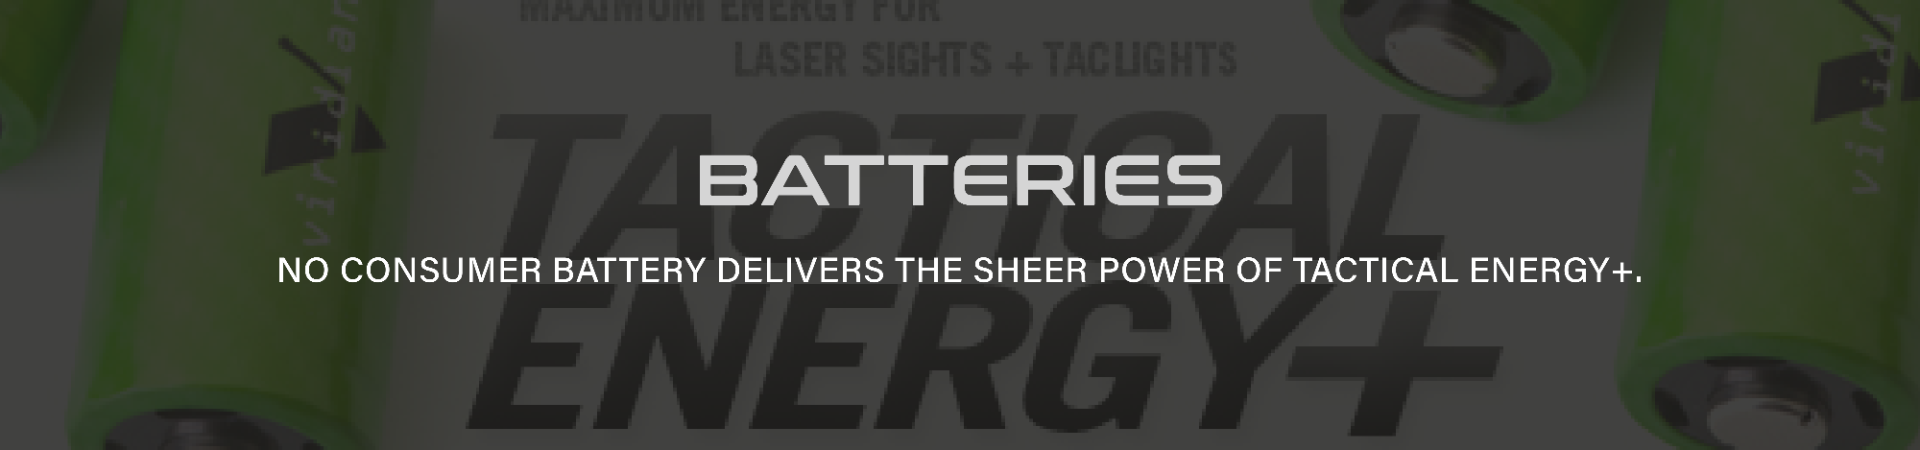 BATTERIES NO CONSUMER BATTERY DELIVERS THE SHEER POWER OF TACTICAL ENERGY+.